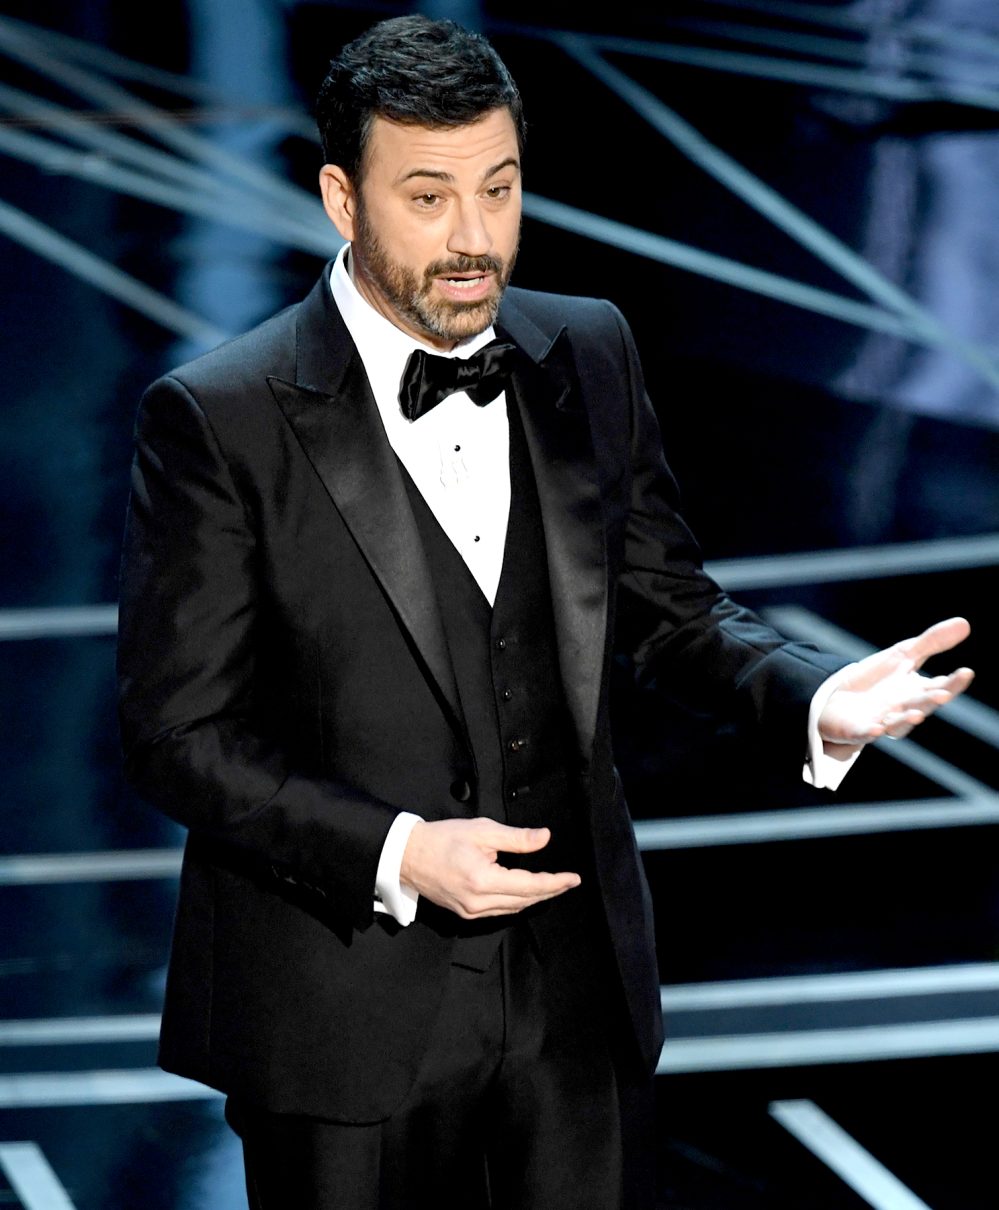 Jimmy Kimmel speaks onstage during the 89th Annual Academy Awards at Hollywood & Highland Center on February 26, 2017 in Hollywood, California.